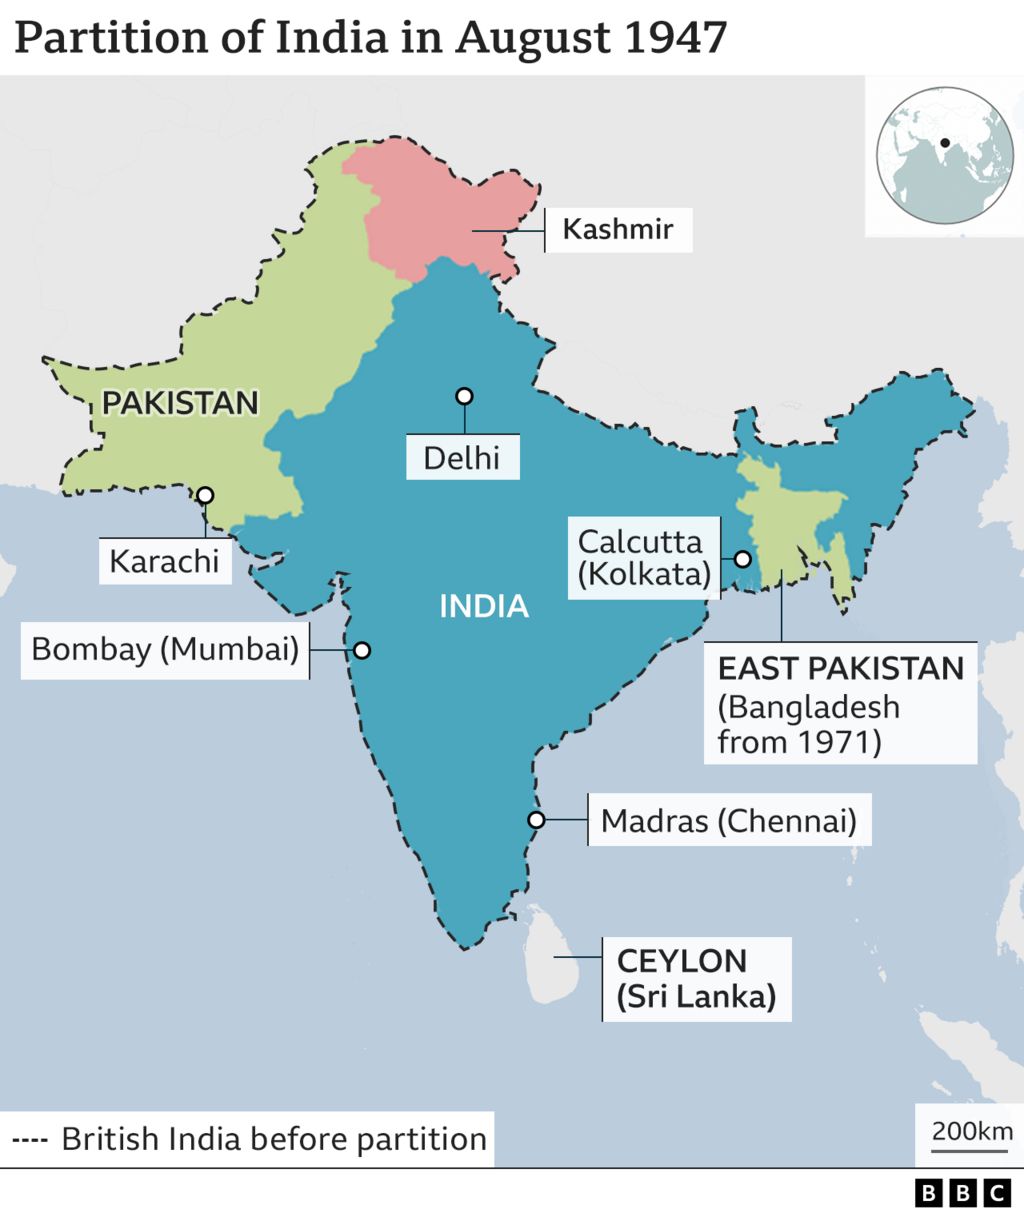 Map of India after partition, showing British India divided into India and Pakistan, with East Pakistan becoming Bangladesh in 1971